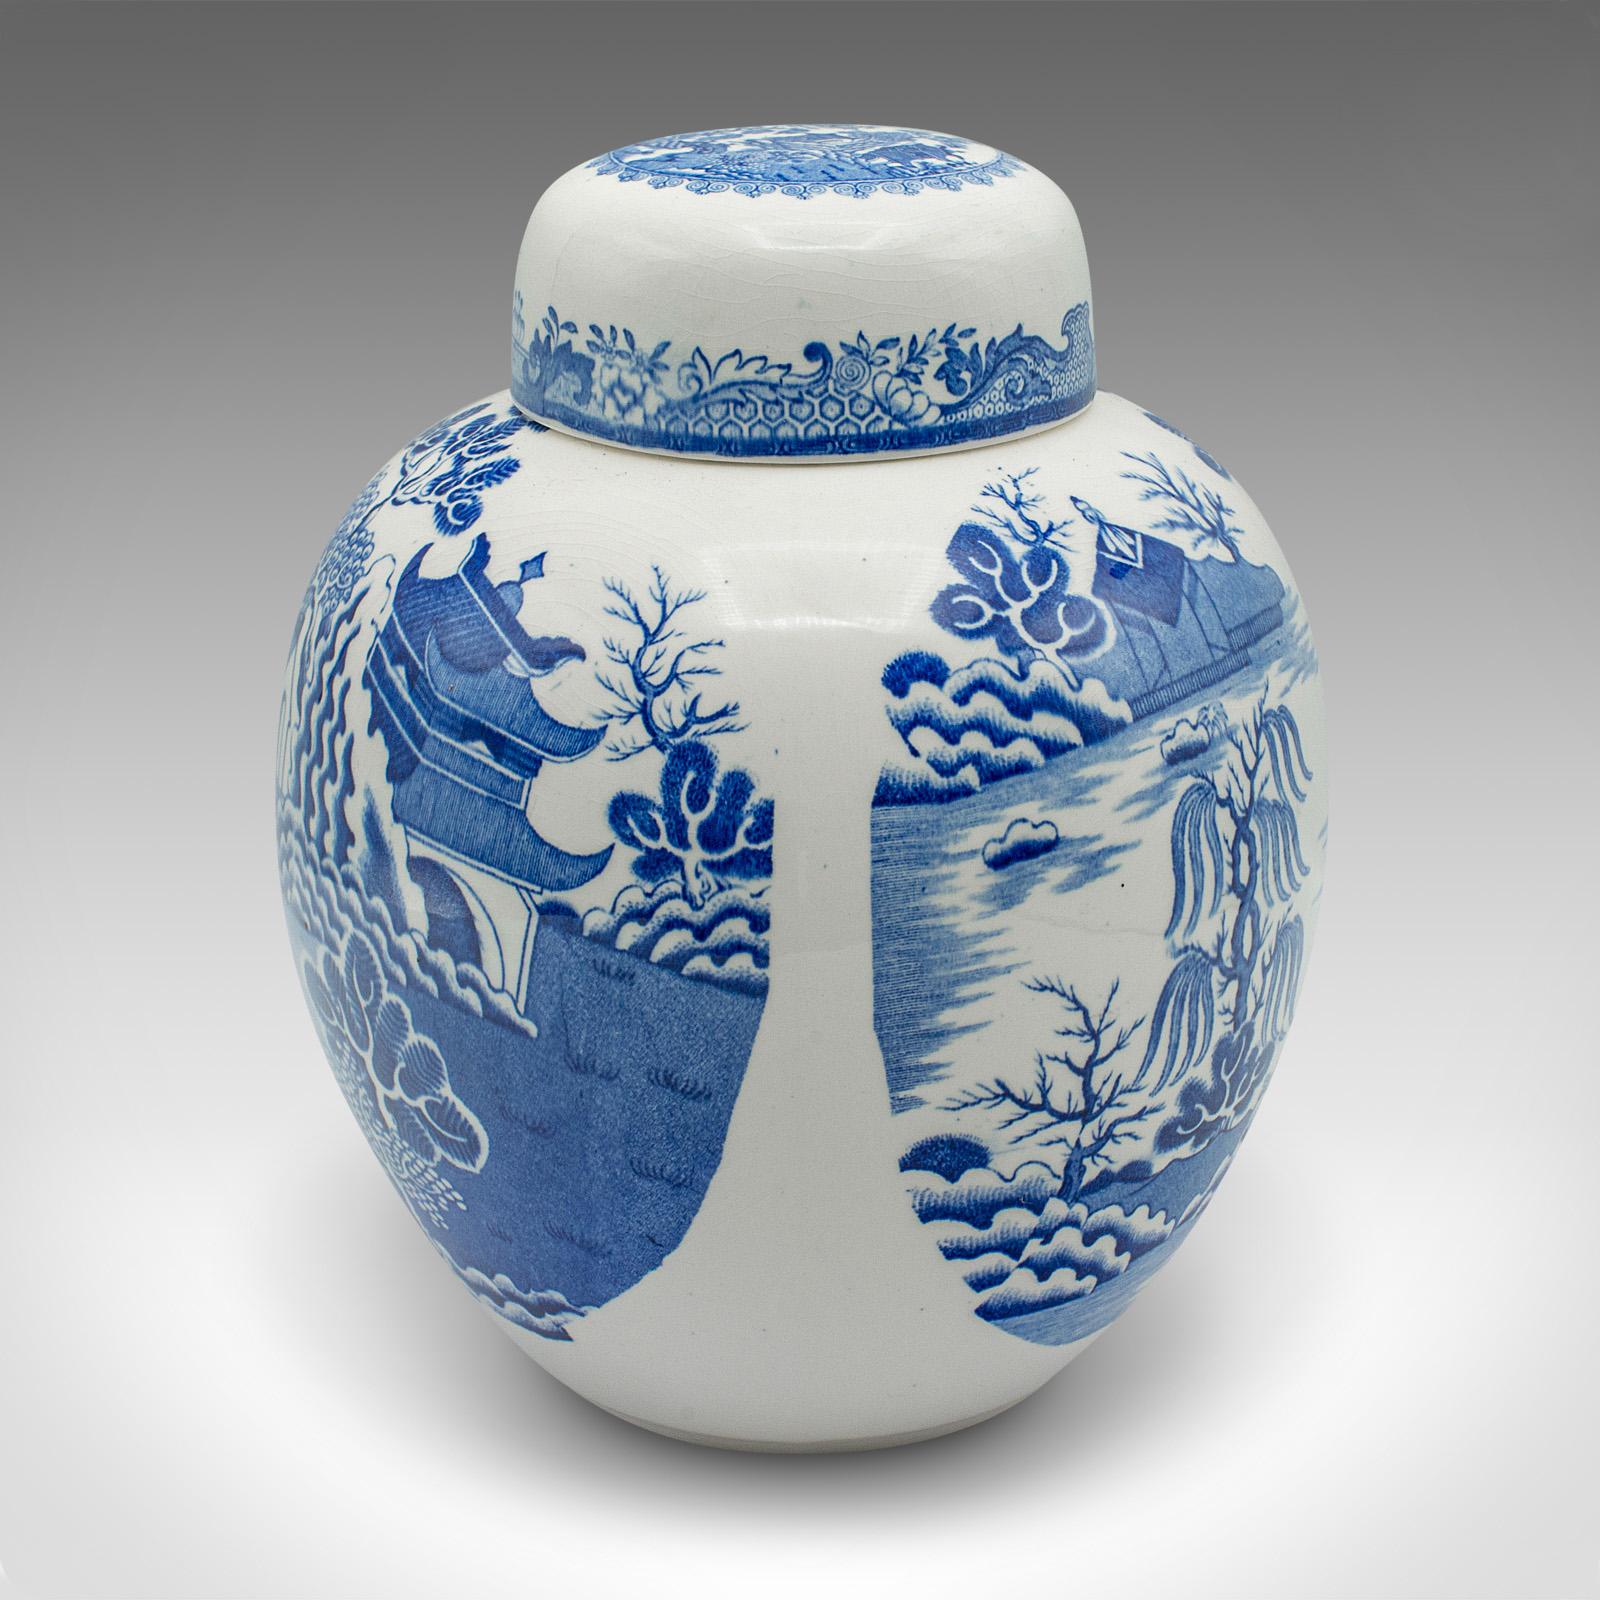 20th Century Vintage Ginger Jar, English, Ceramic, Decorative Spice Urn, Blue and White, 1970 For Sale